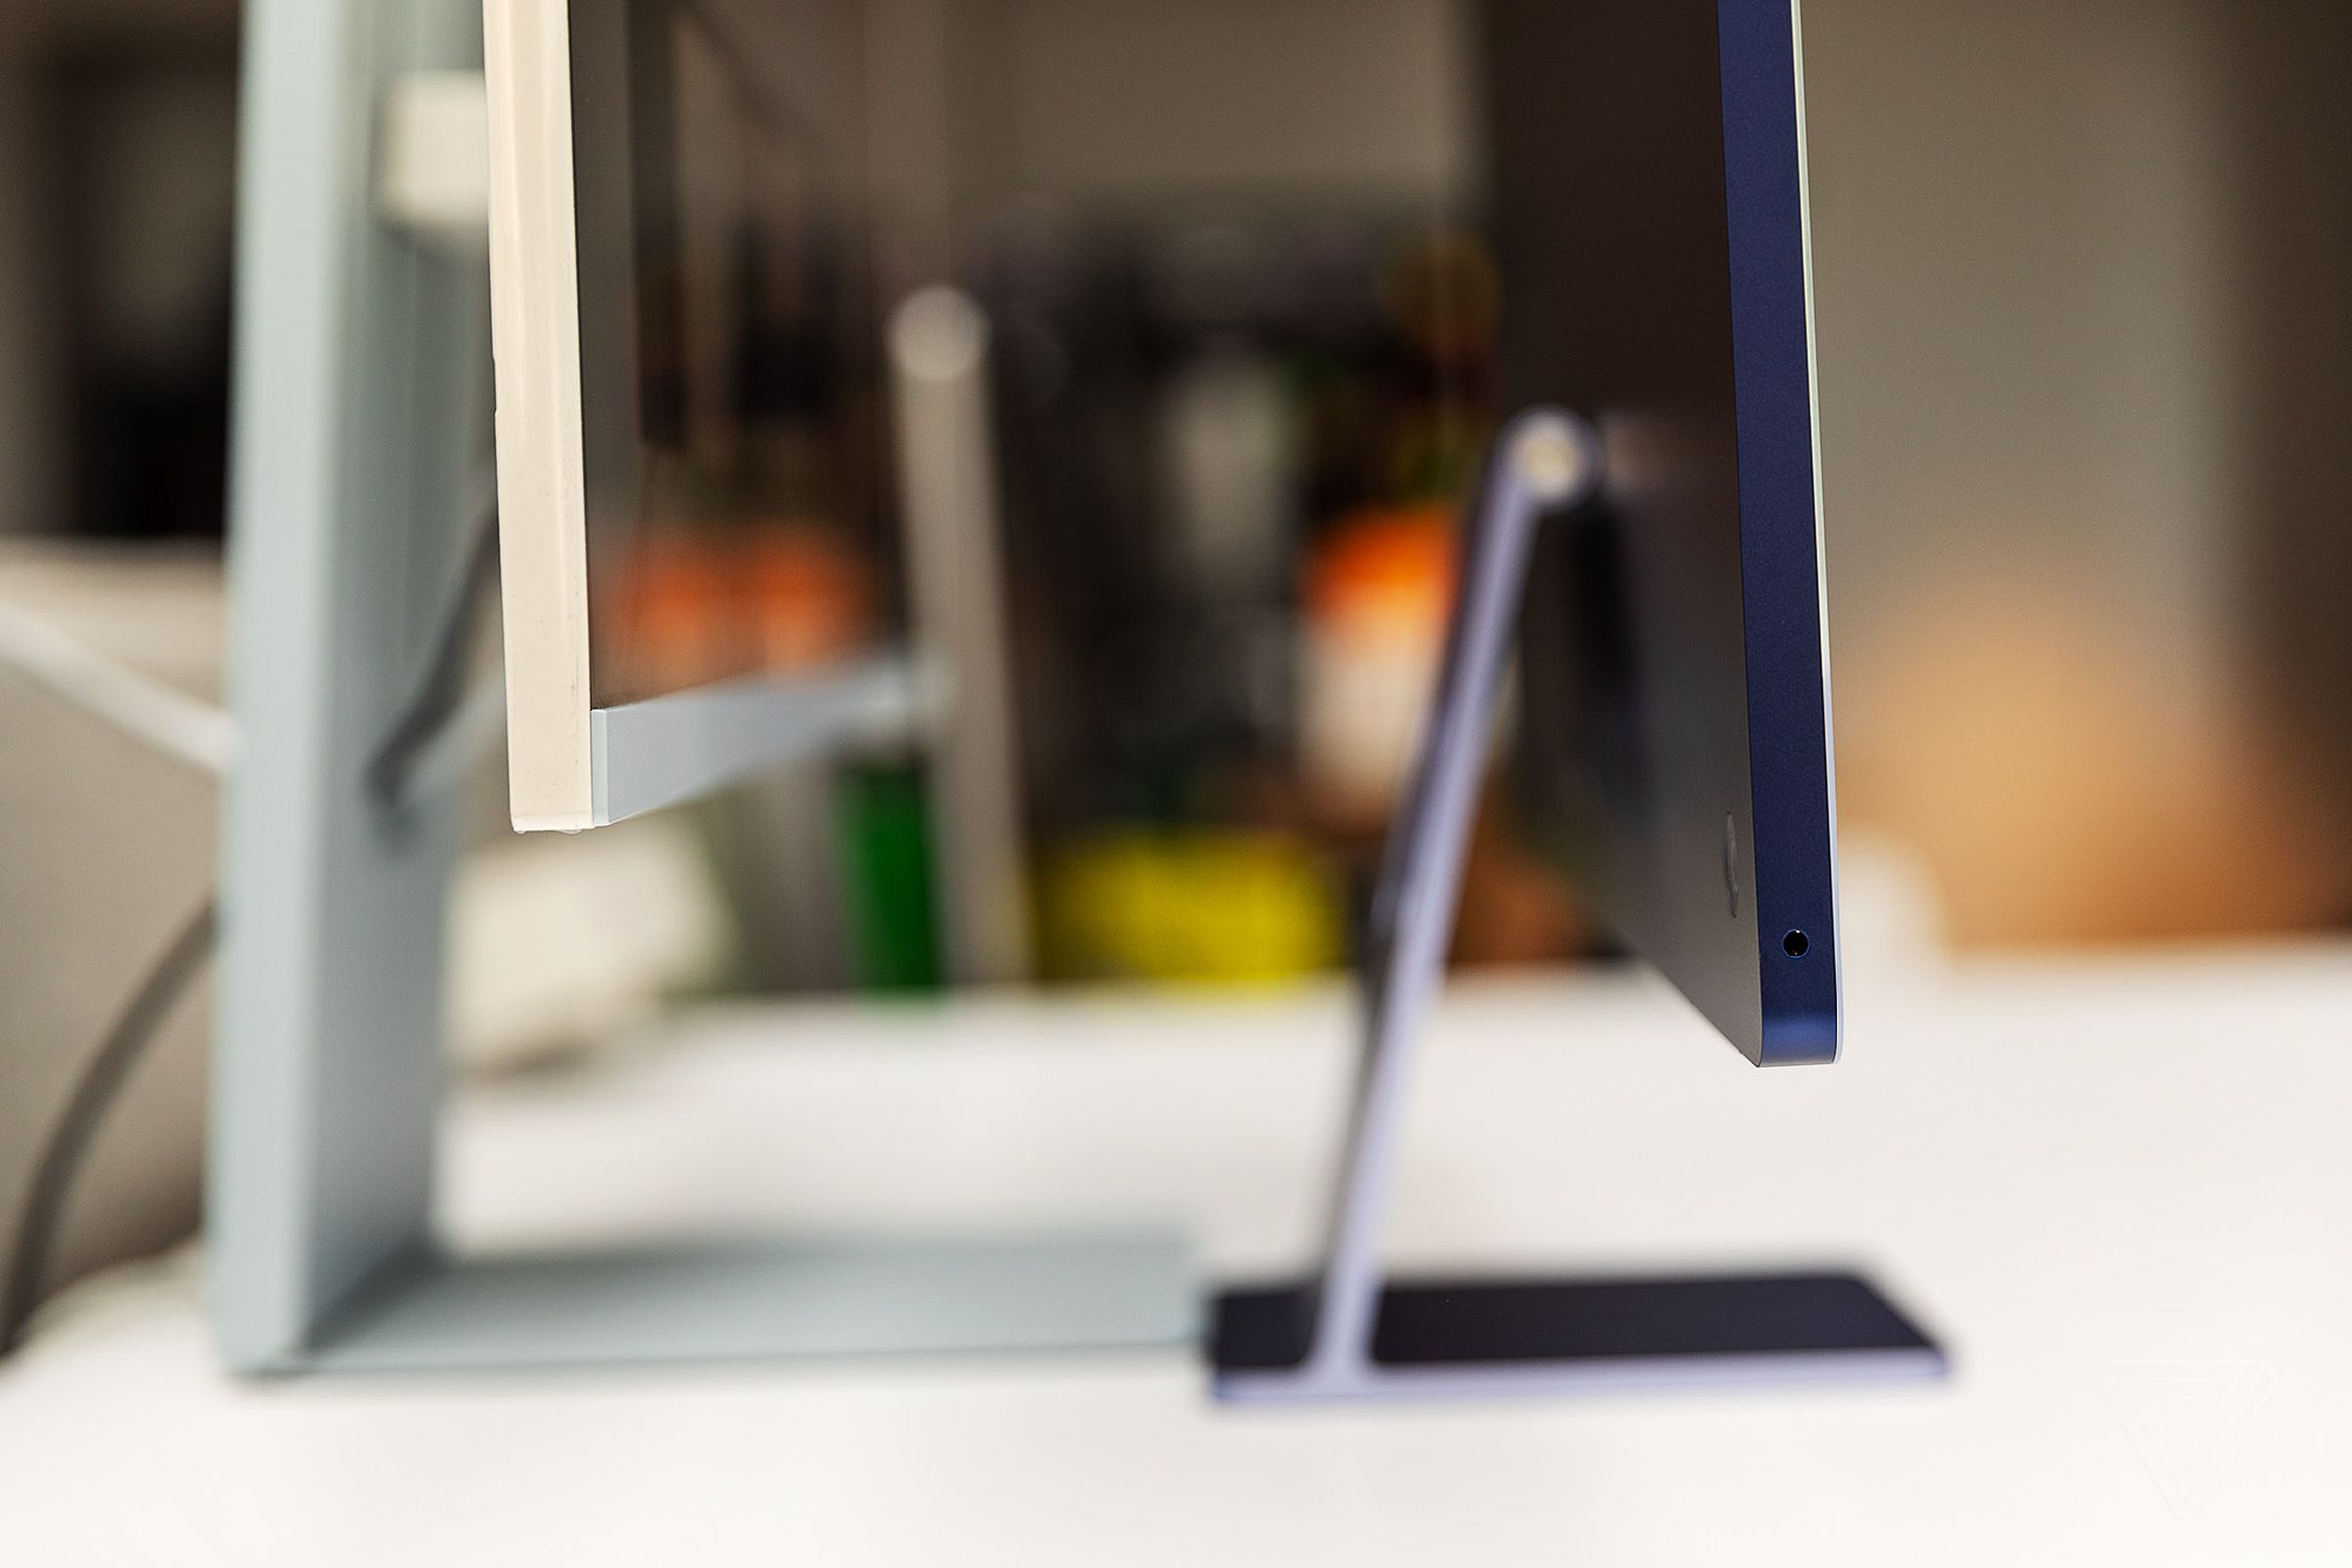 Side profile of the Samsung M8 and the Apple M1 iMac. The iMac has a much slimmer stand and display casing.